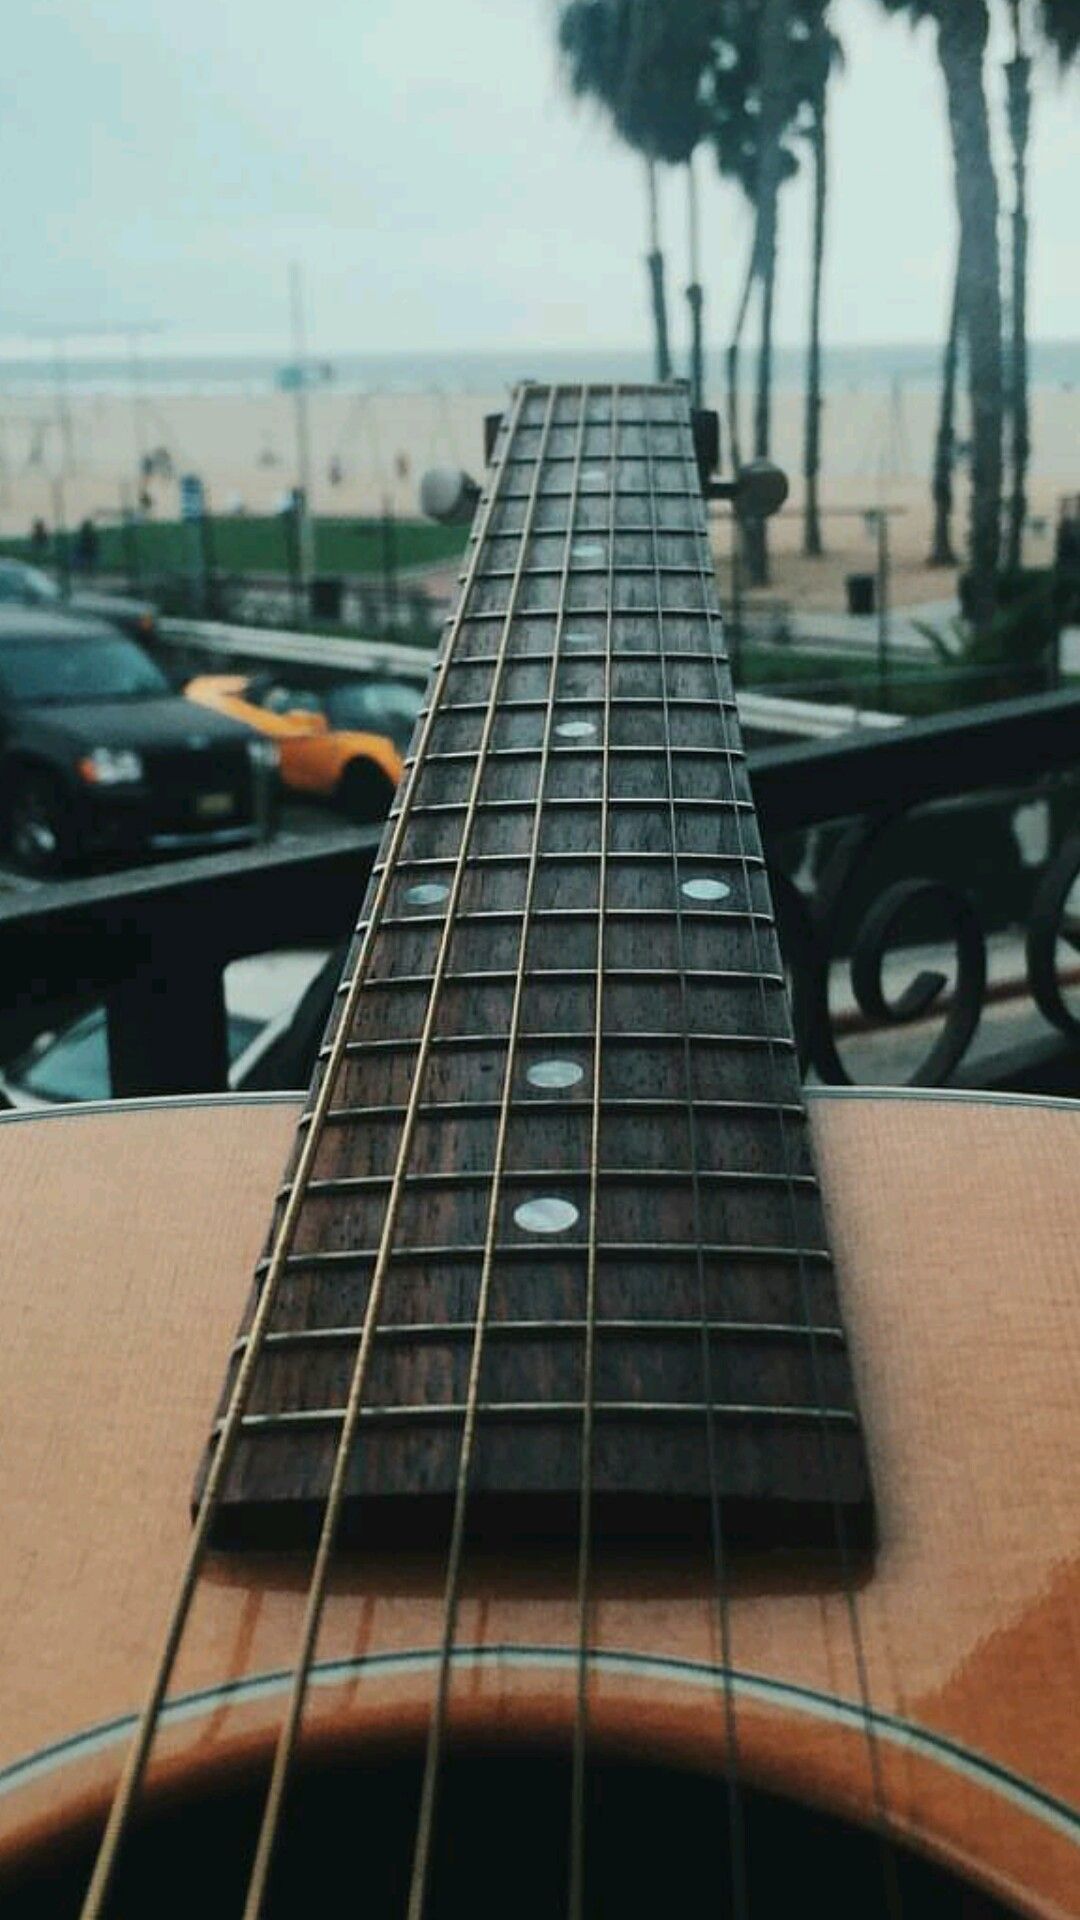 Guitar Wallpaper From Alex Aiono Post On Instagram - Iphone Wallpaper Guitar - HD Wallpaper 